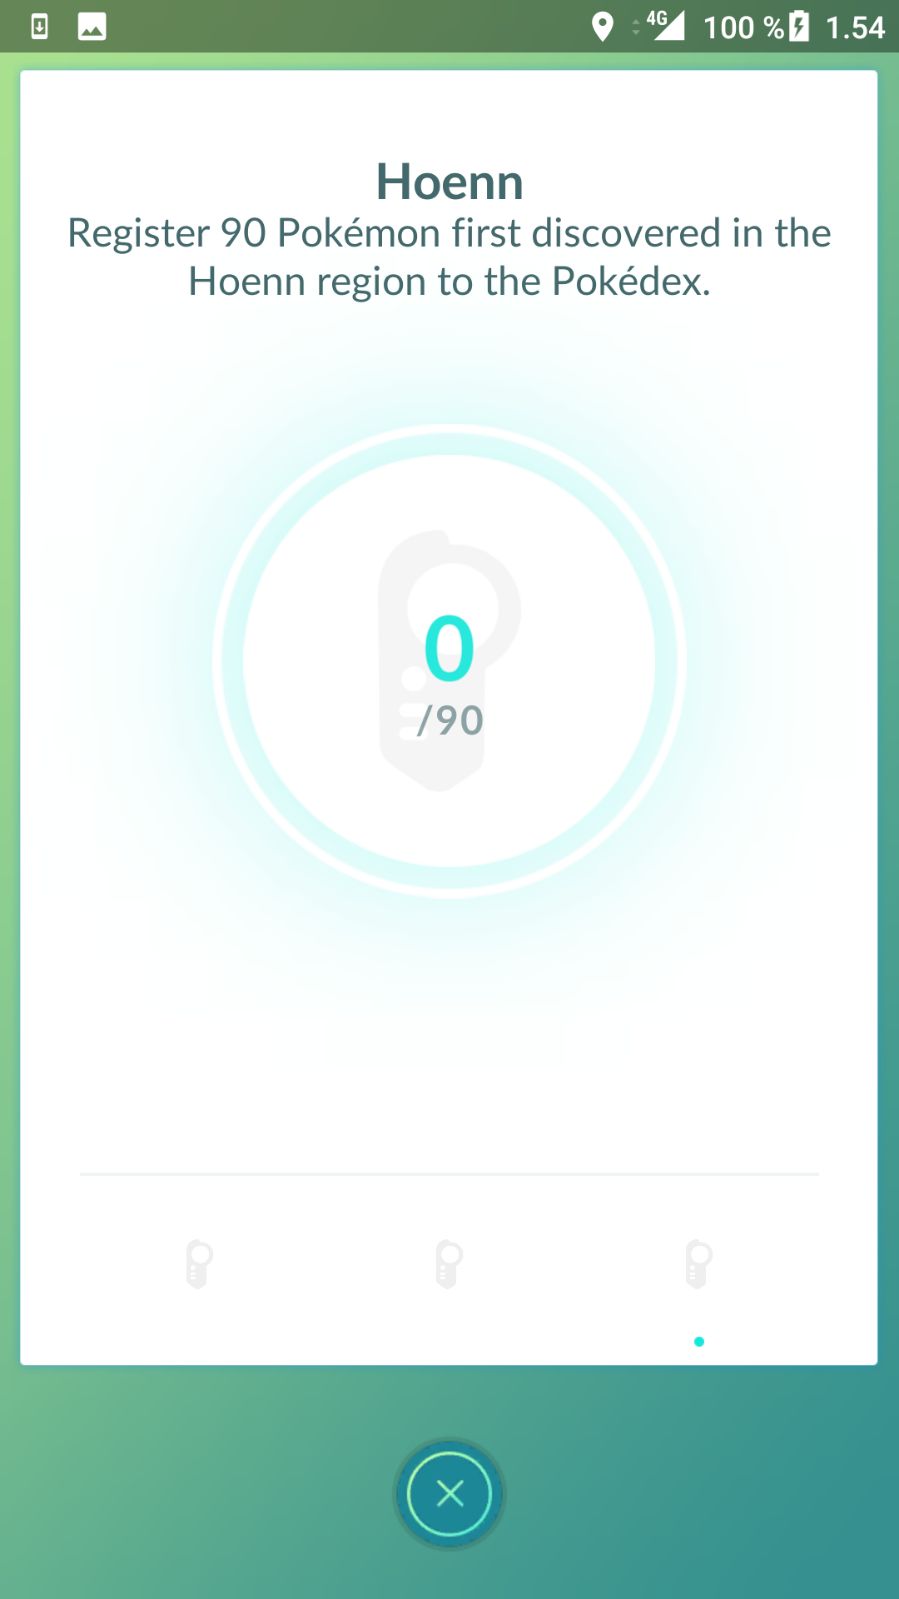 Legendary and gen 3 badges in game now